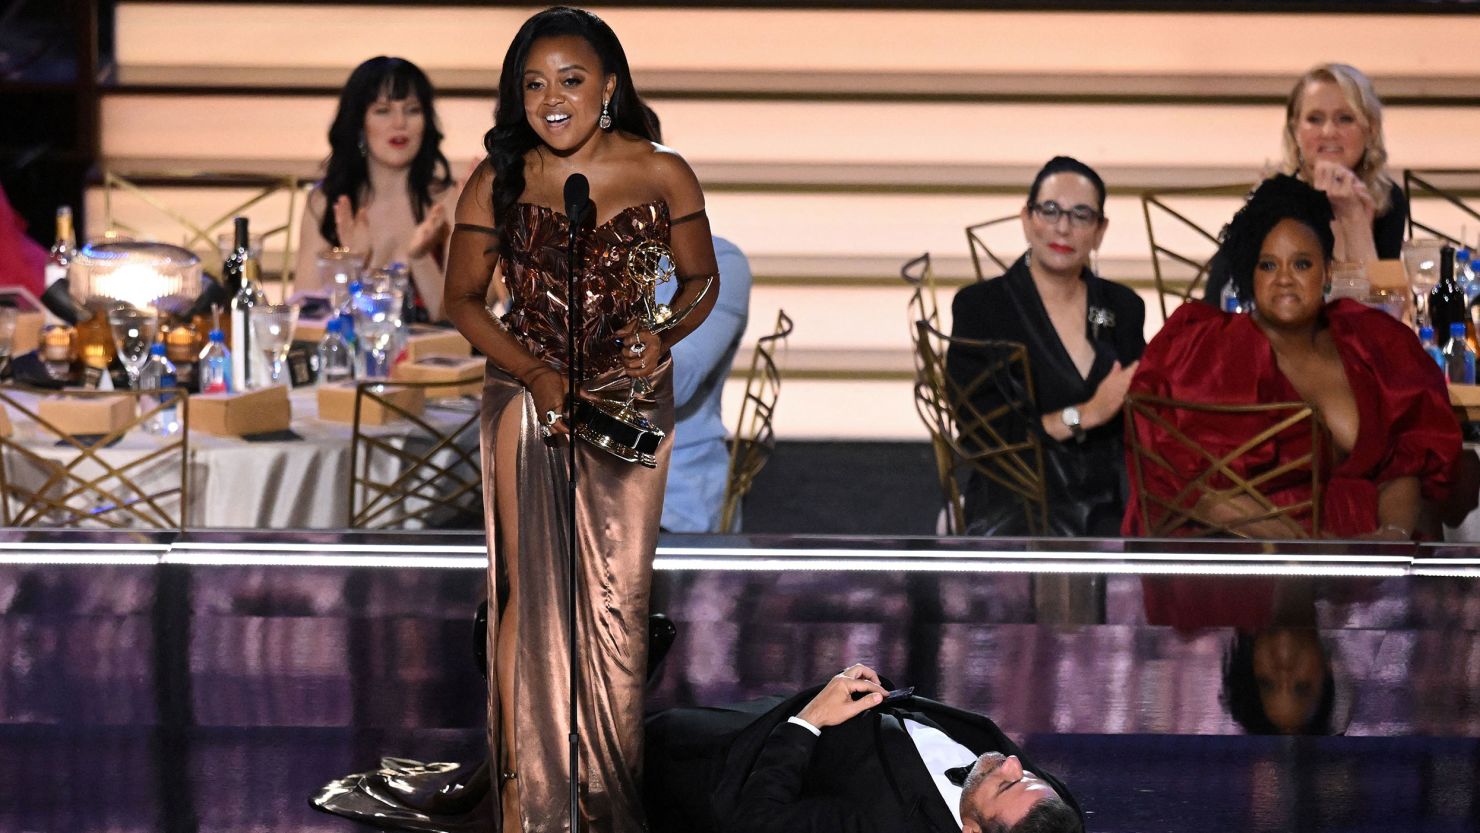 "Abbott Elementary" creator Quinta Brunson accepted the award for outstanding writing for a comedy series while Jimmy Kimmel was splayed underneath her, pretending to be unconscious. 